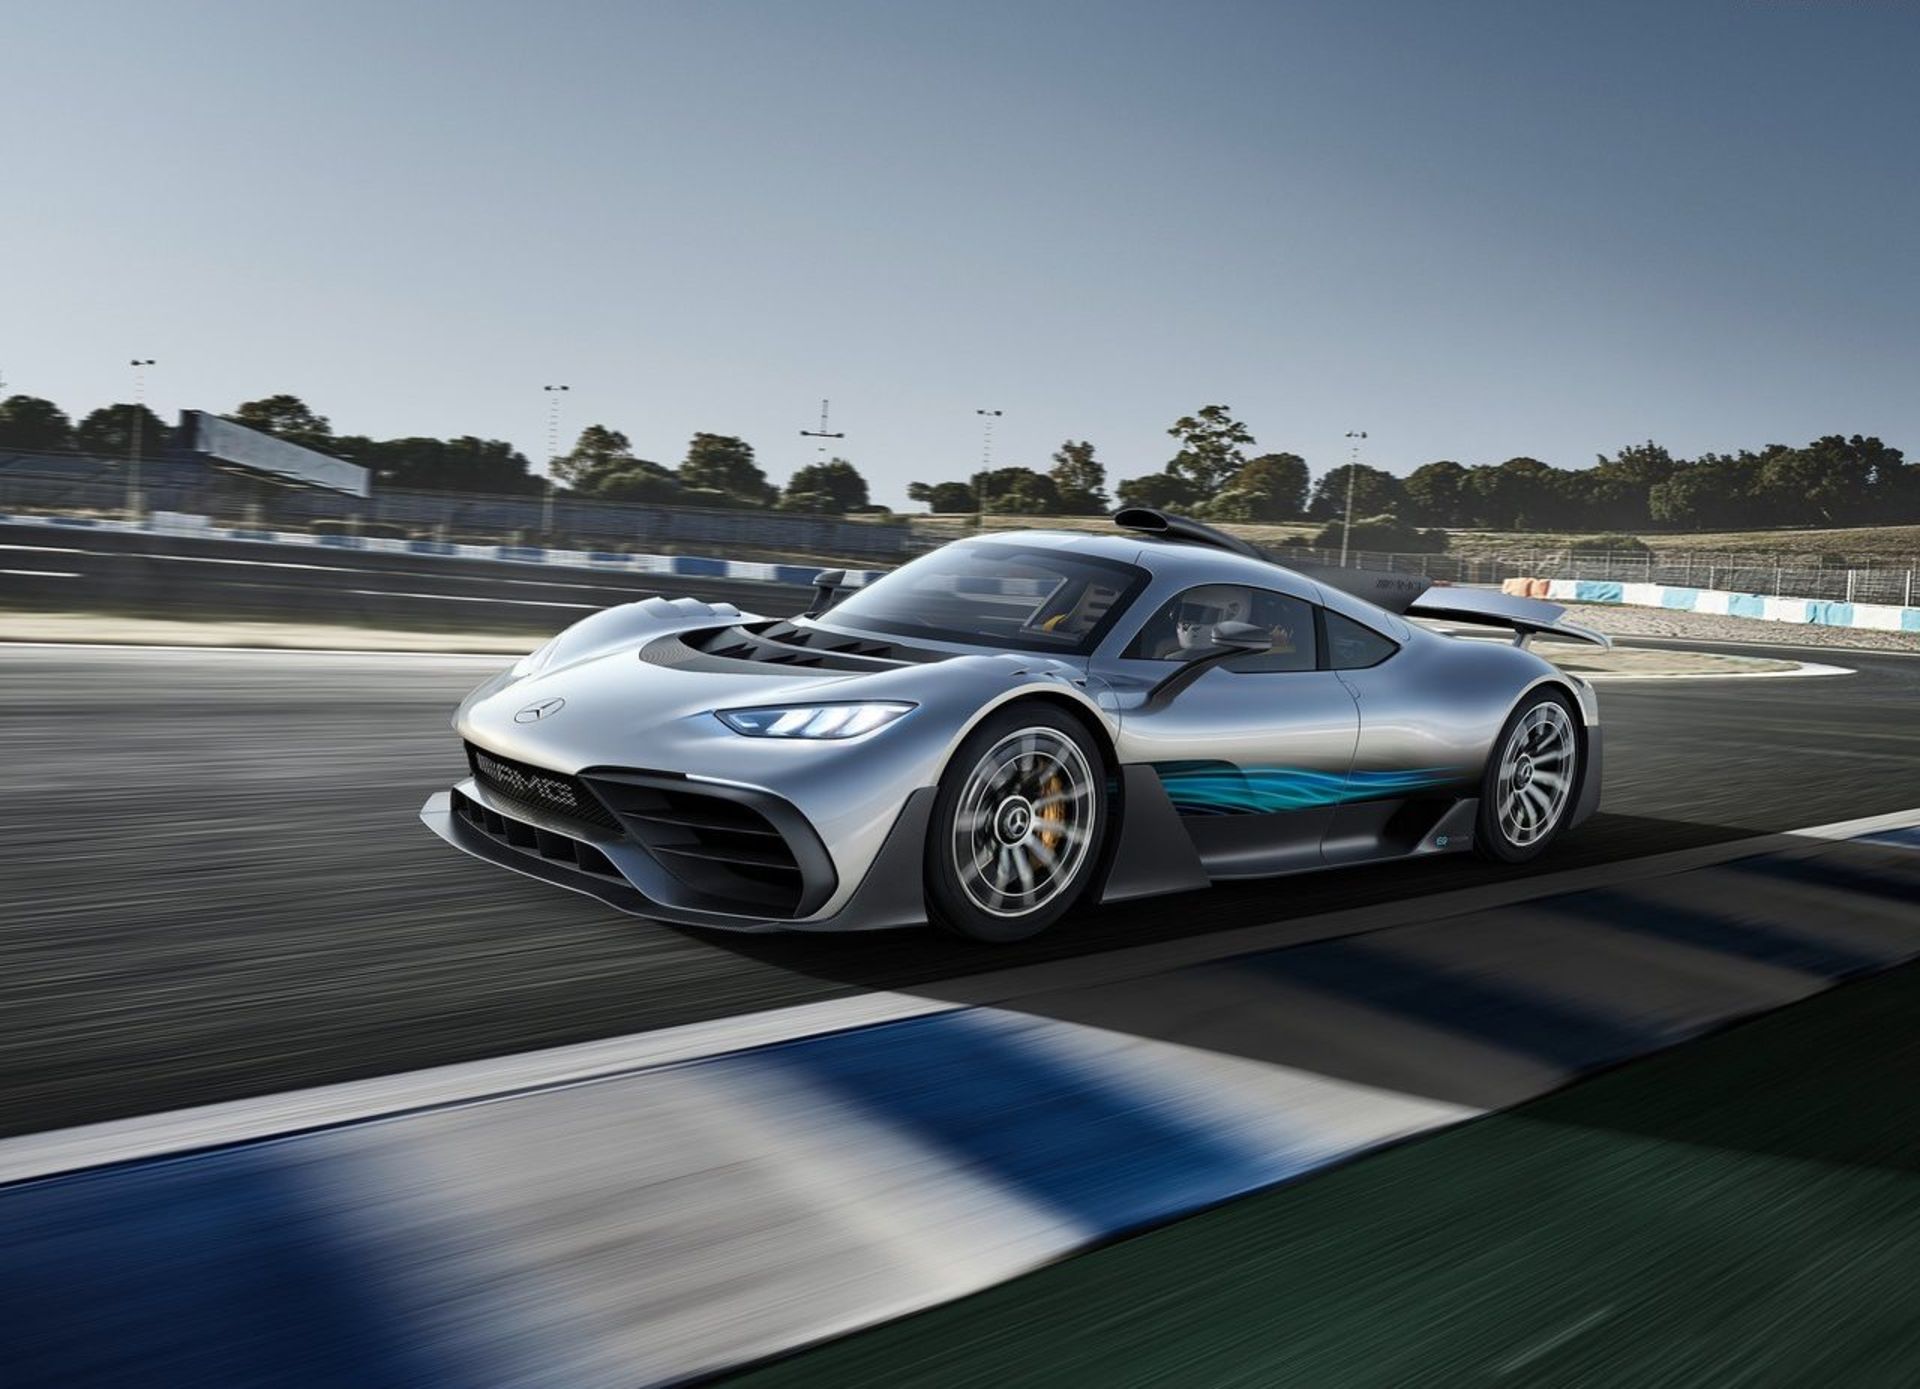 Mercedes-Benz AMG Project ONE 